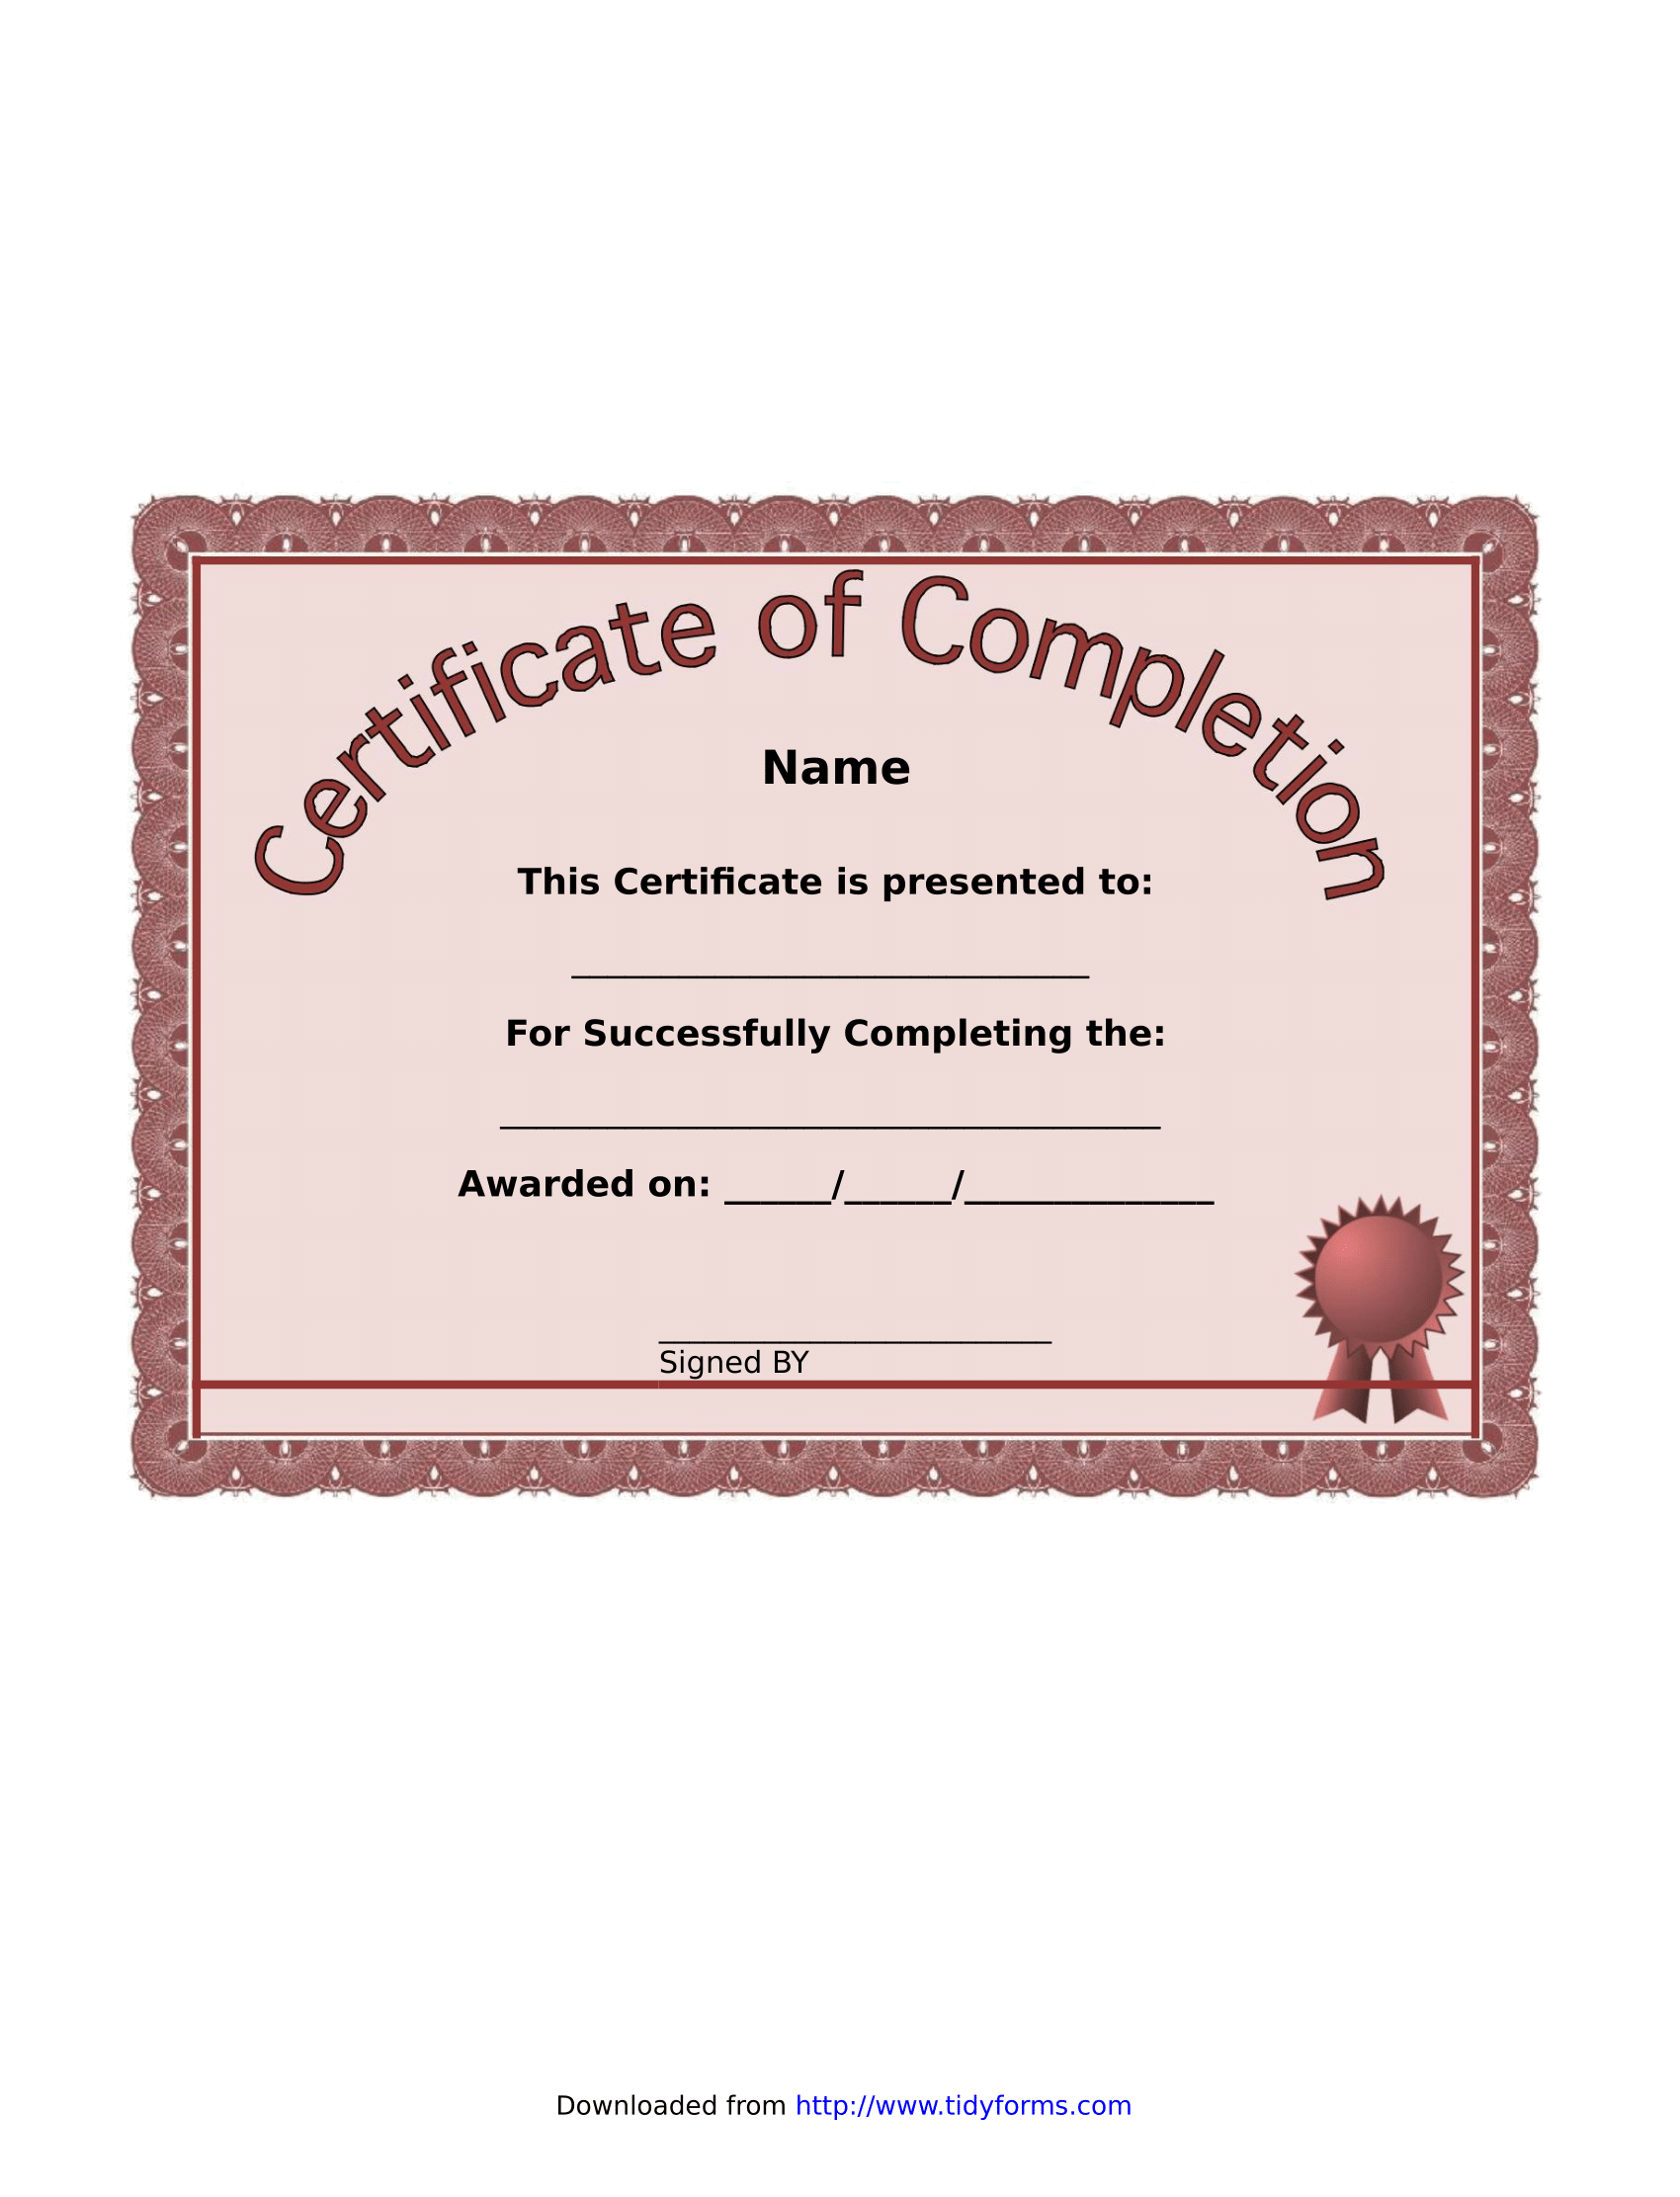 Certificate of Completion – FREE Download